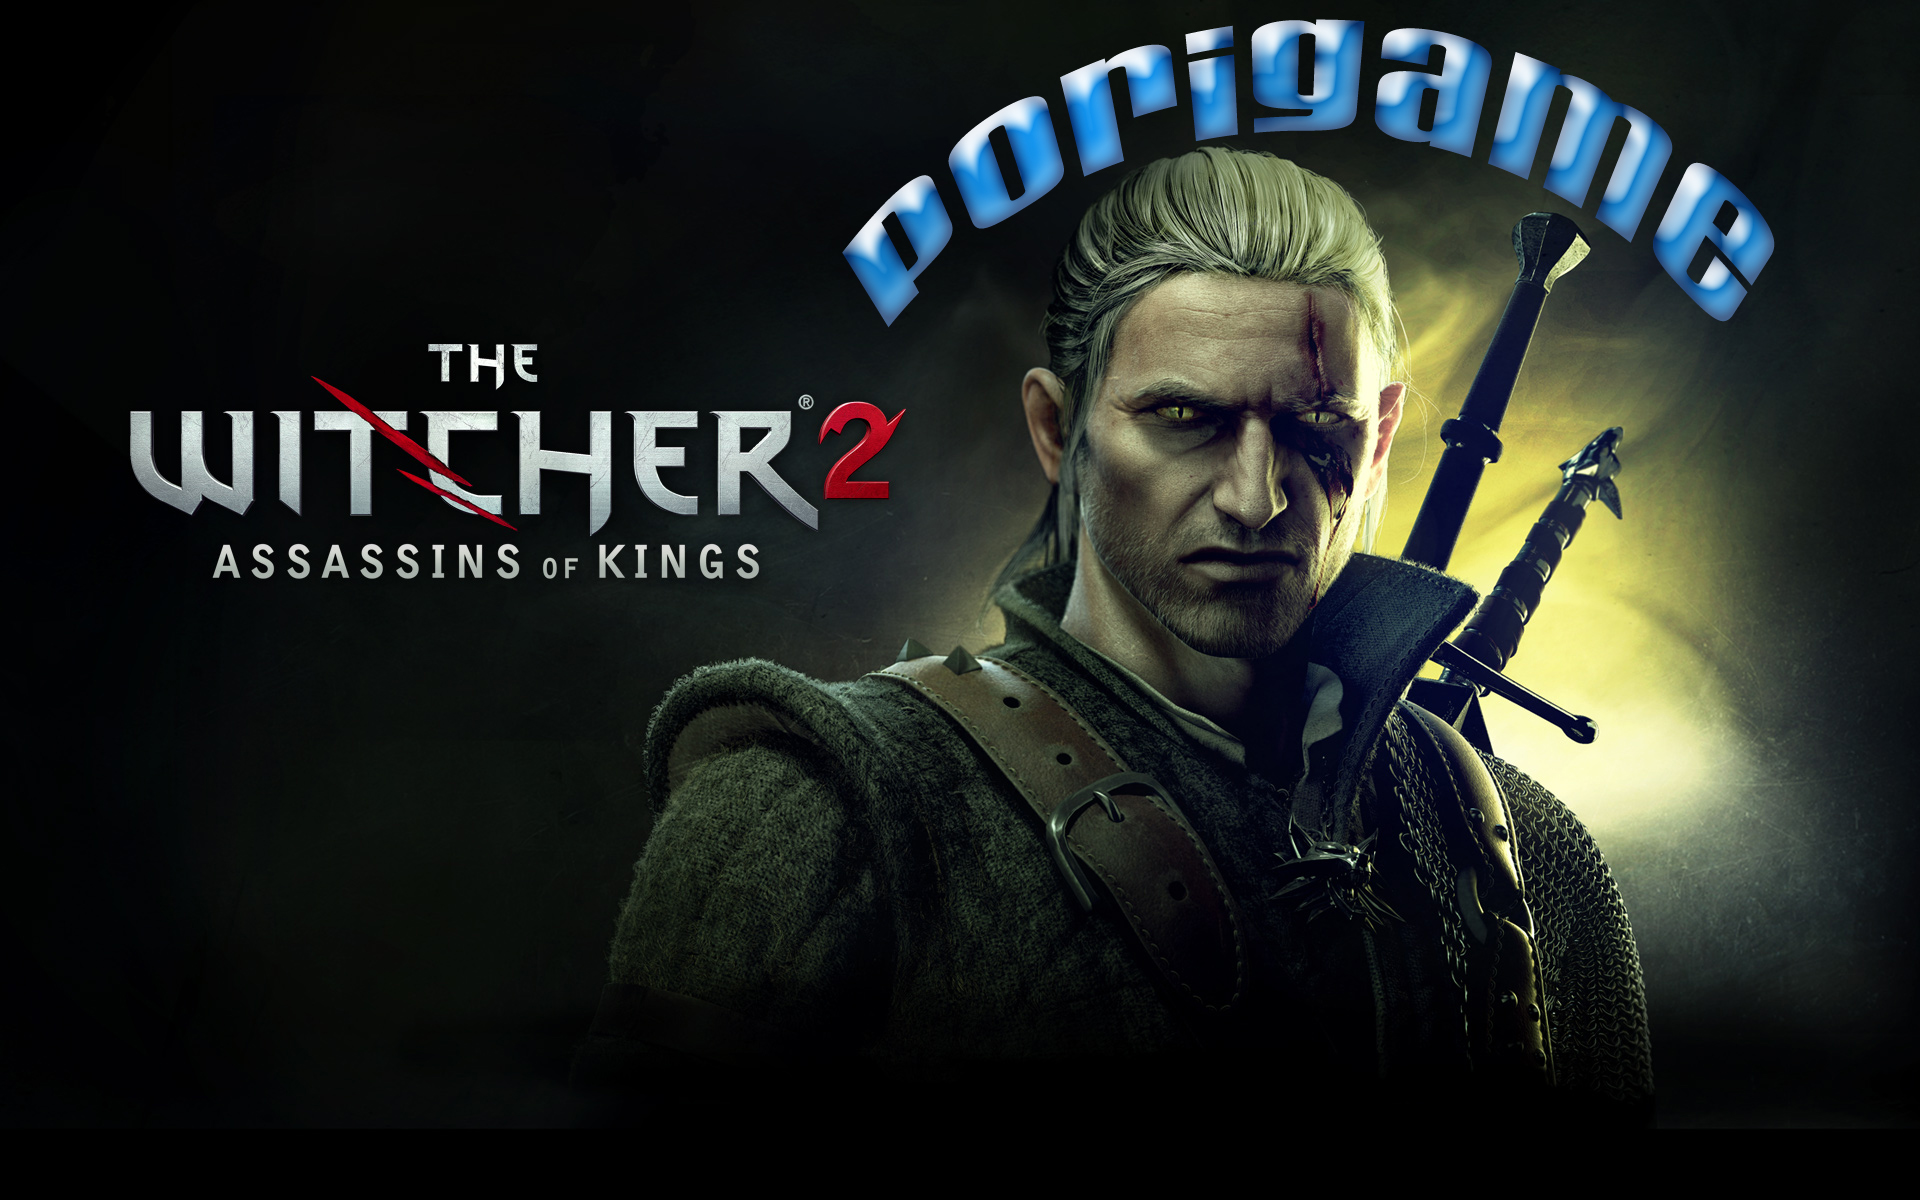 http://s2.picofile.com/file/7119790642/witcher2.jpg